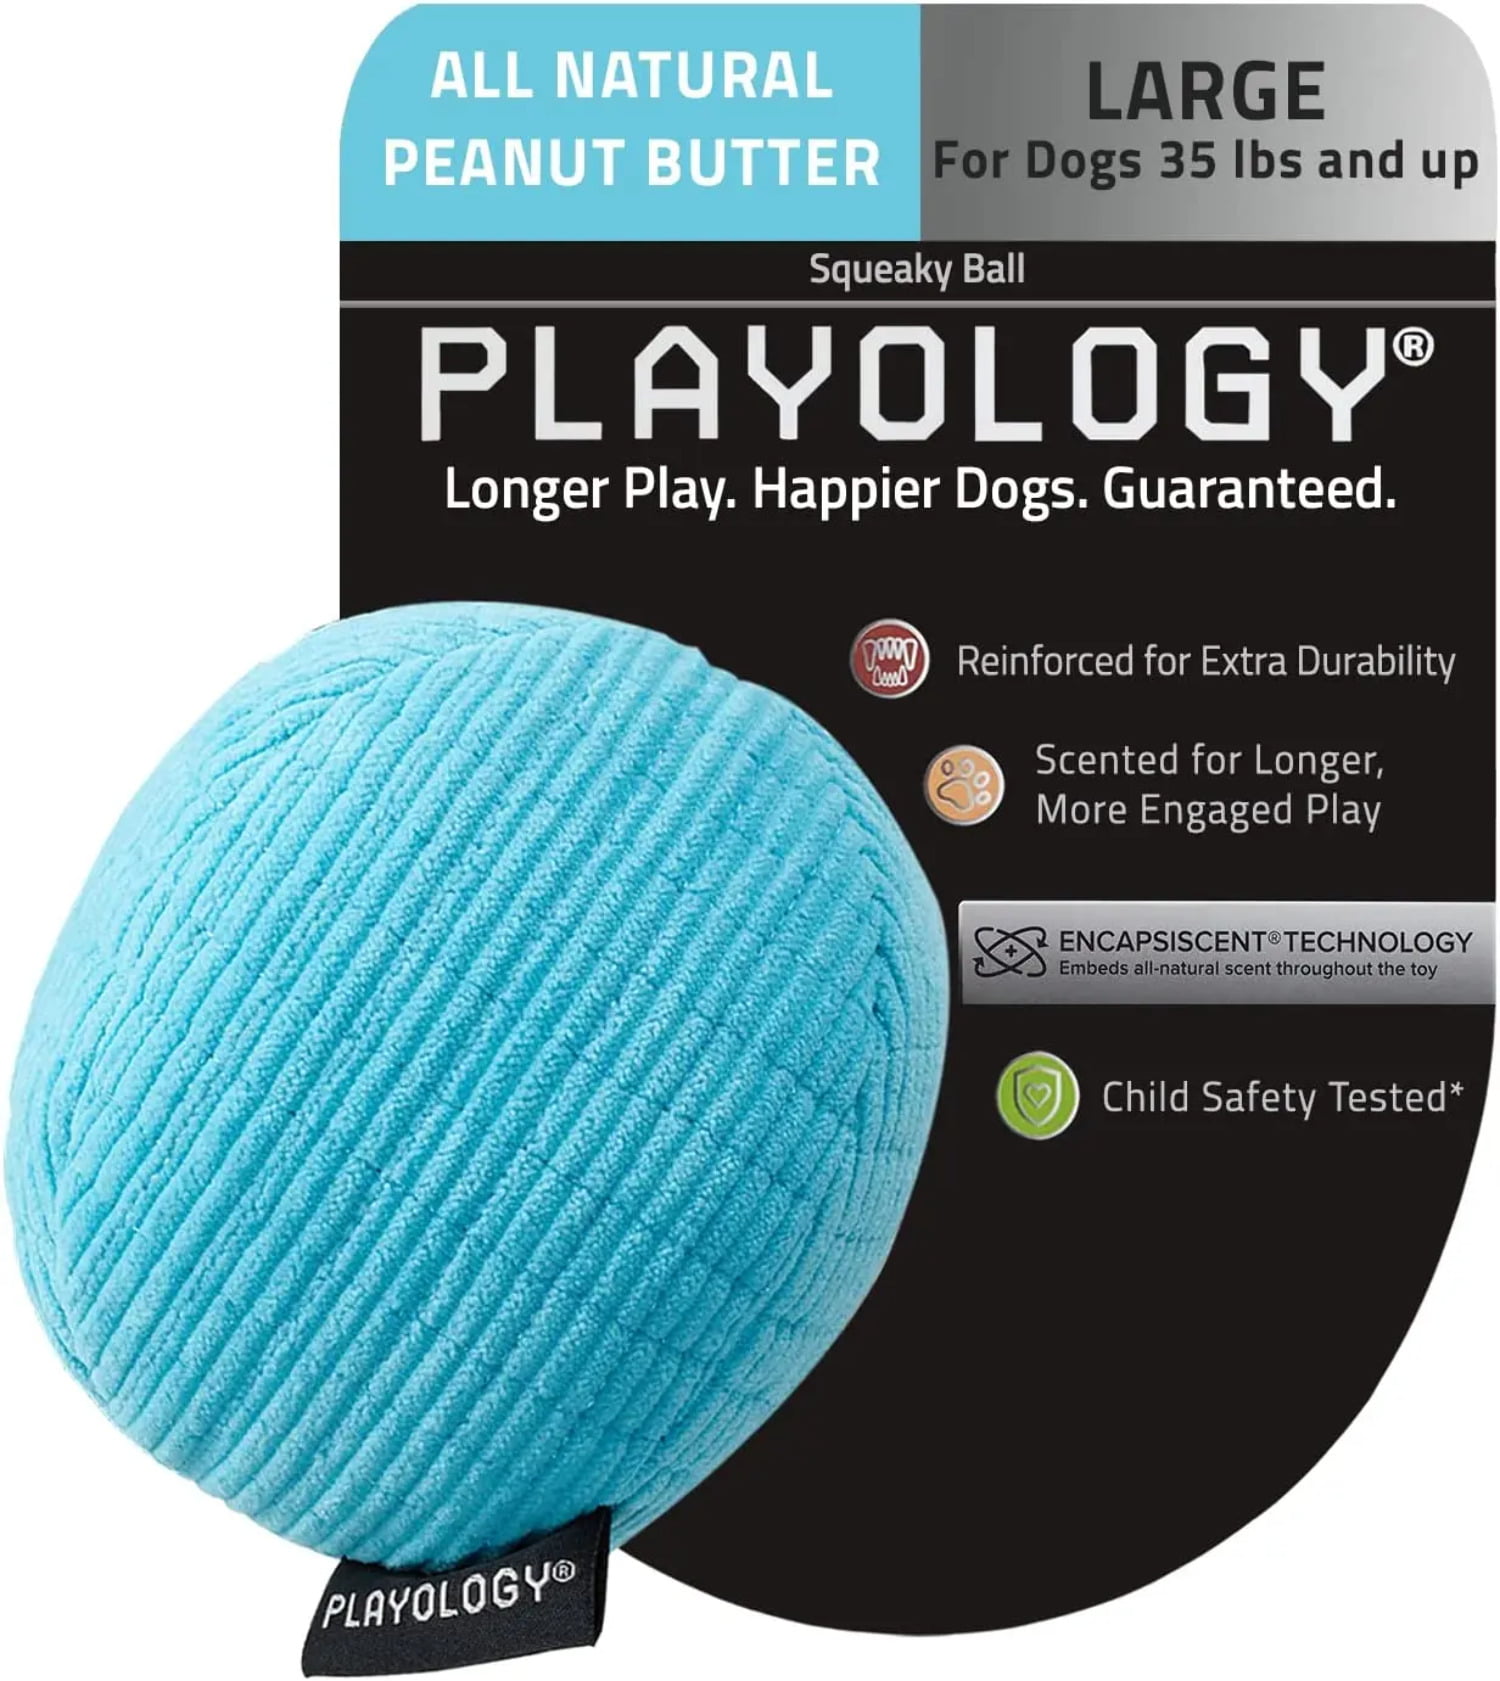 Playology Plush Ball Peanut Butter Scented Dog Toy - Small